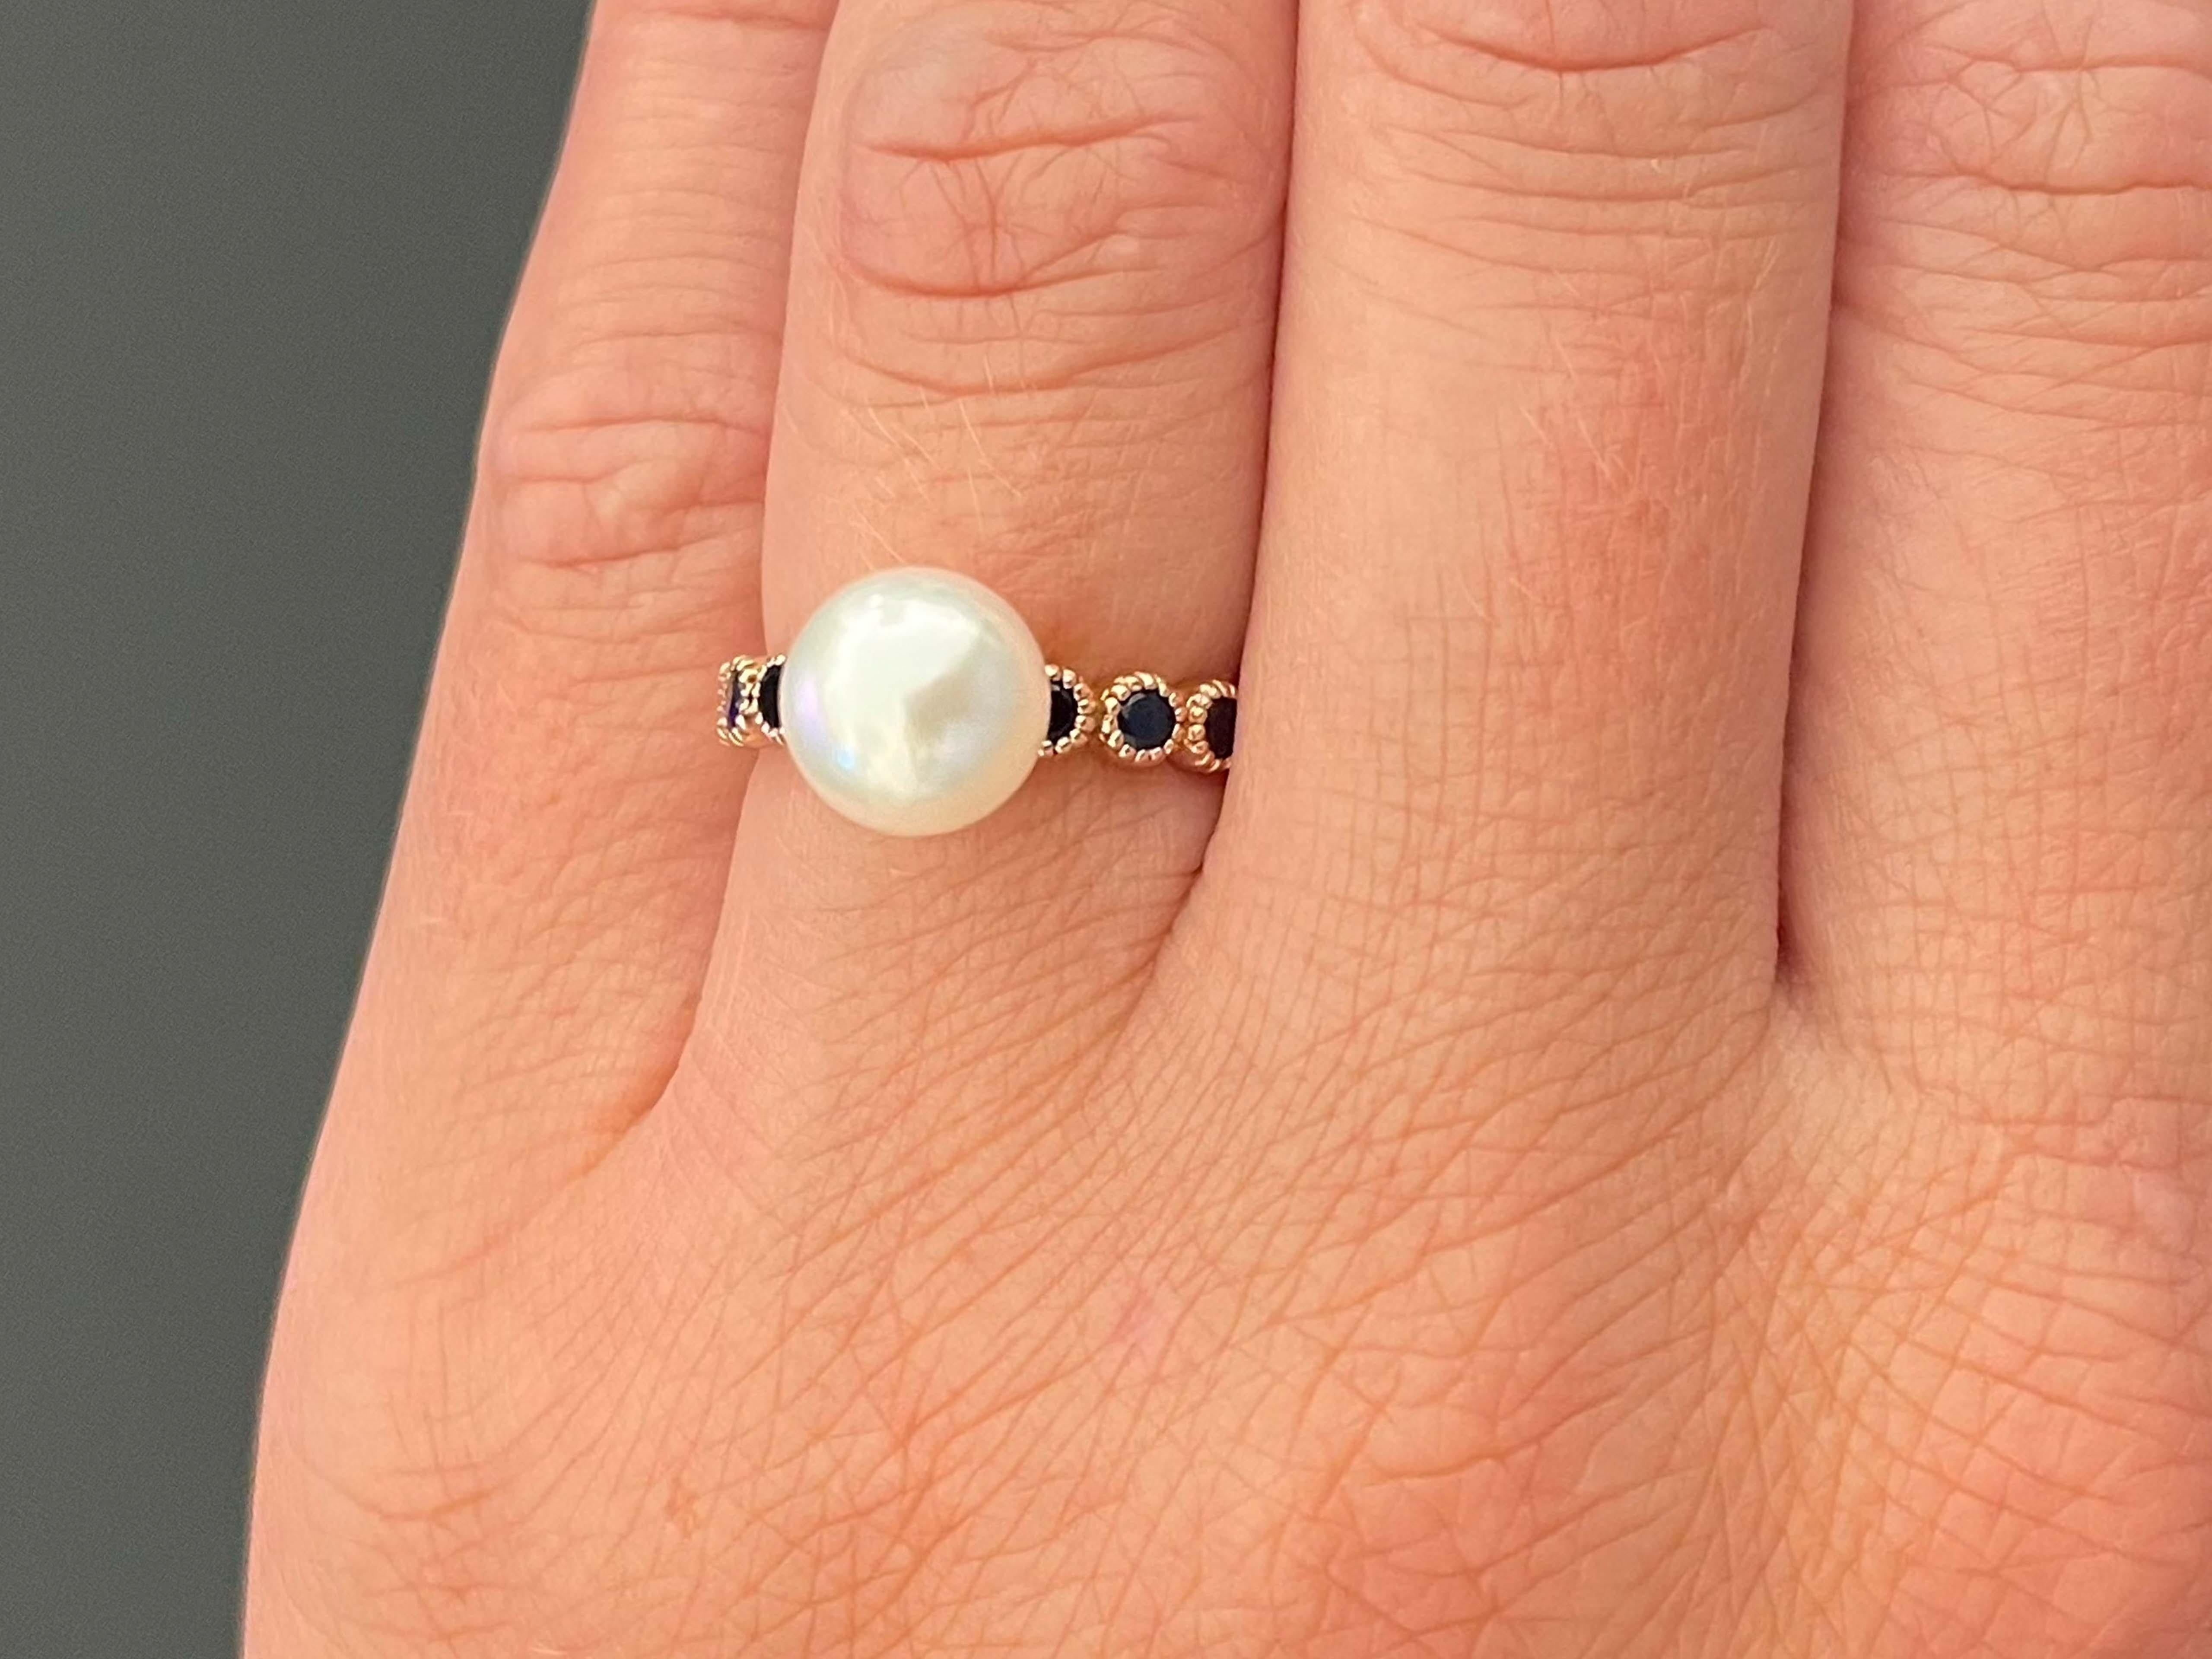 White Pearl & Sapphire Ring in 14k Rose Gold. The center of this beautiful ring features a white akoya pearl, 8.4 mm in diameter and the band is bezel set with 8 deep blue round sapphires. The ring is size 5.75 and can be easily re-sized for a small